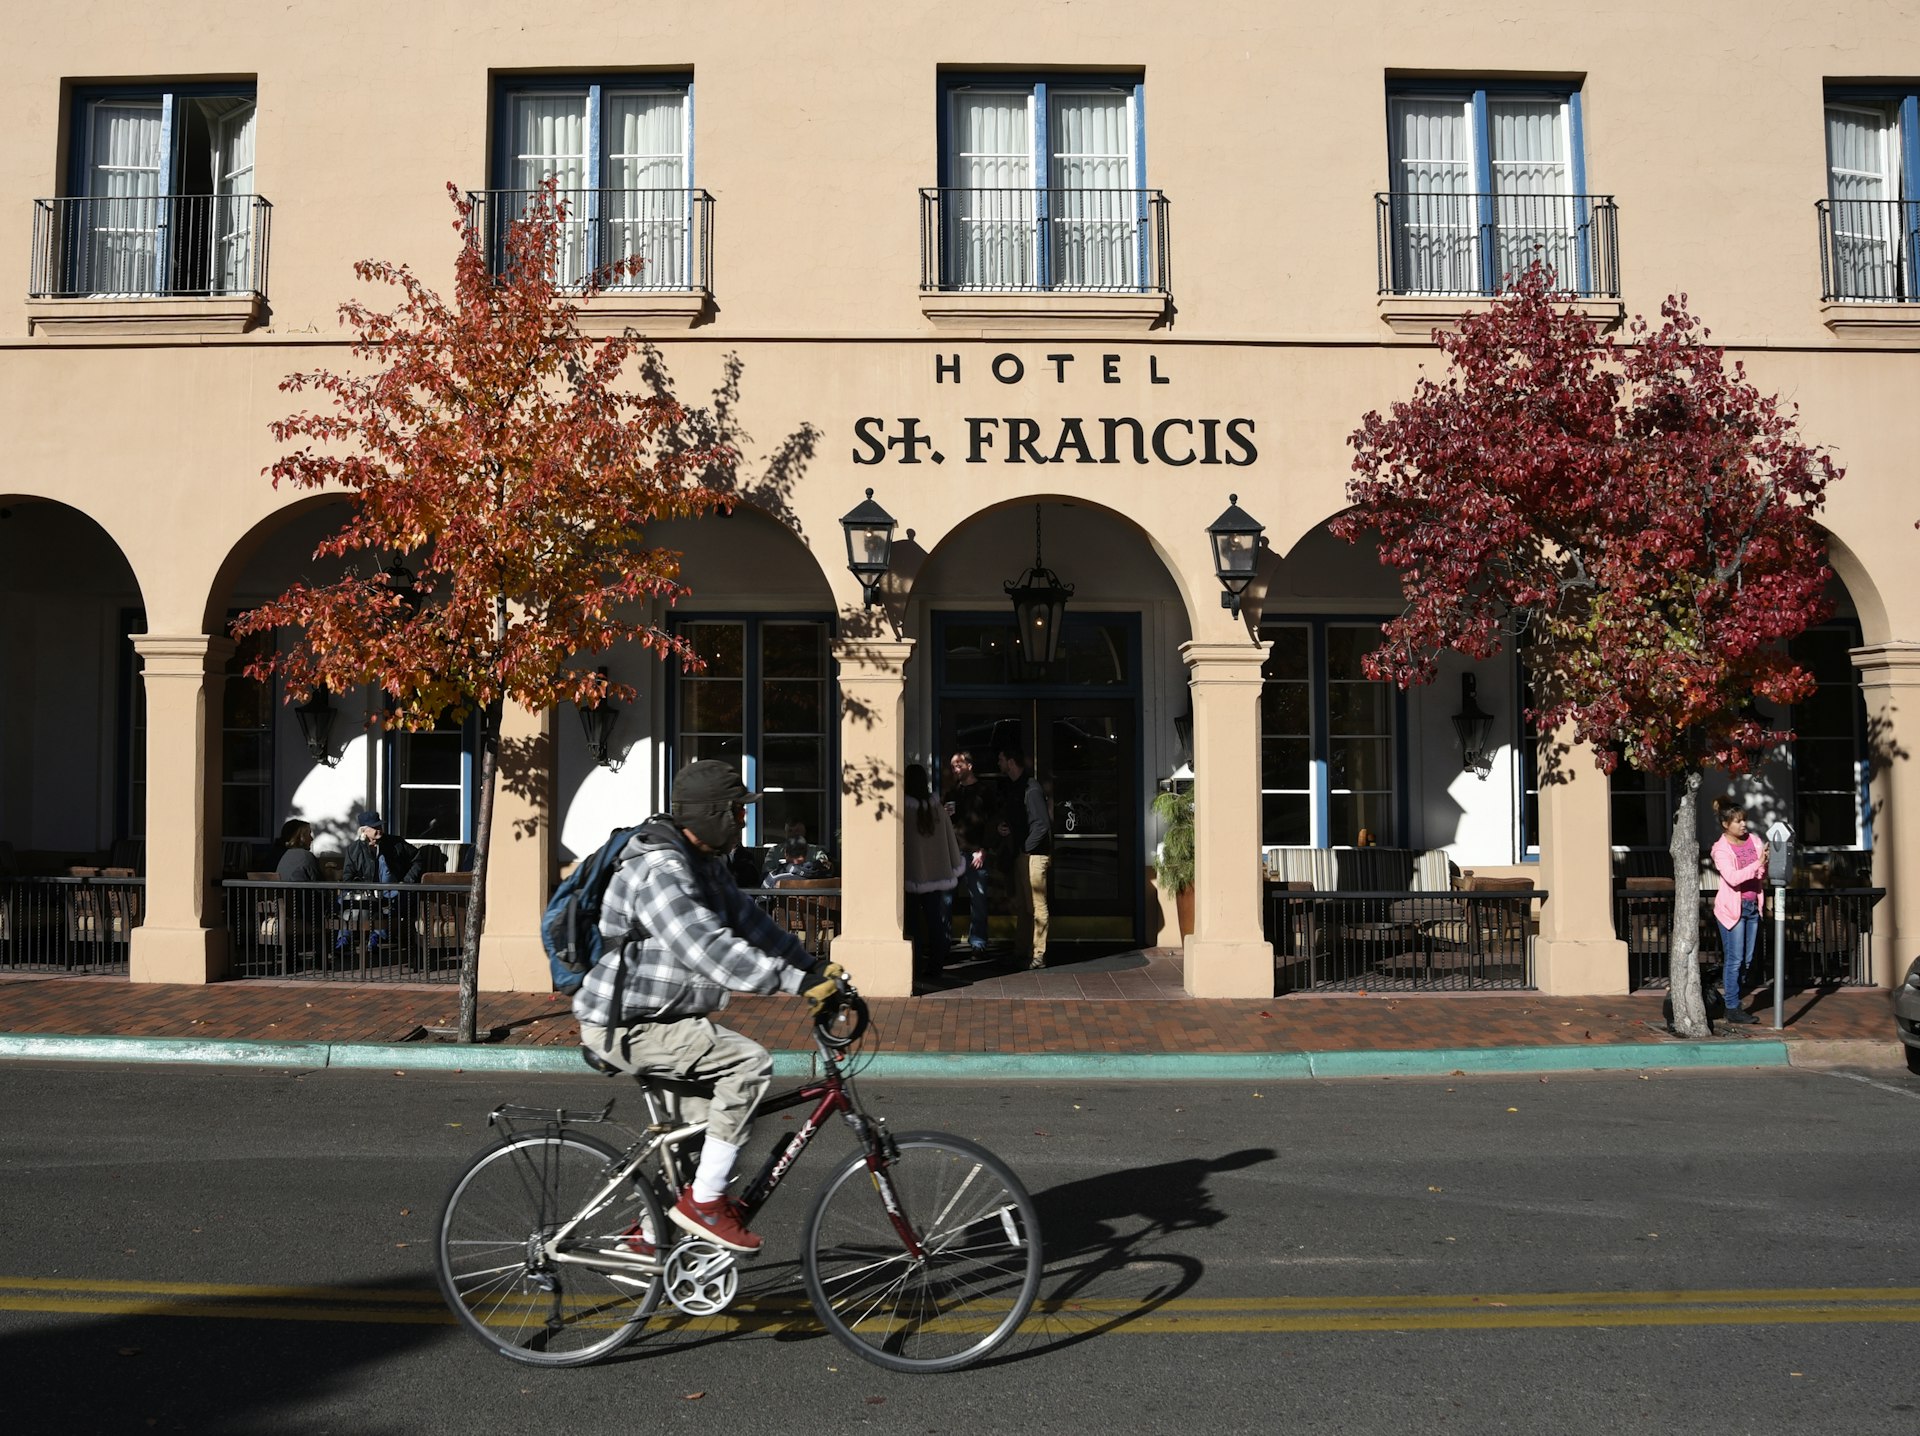 A man rides a bicycle past the entrance to the Hotel St. Francis in Santa Fe, New Mexico.